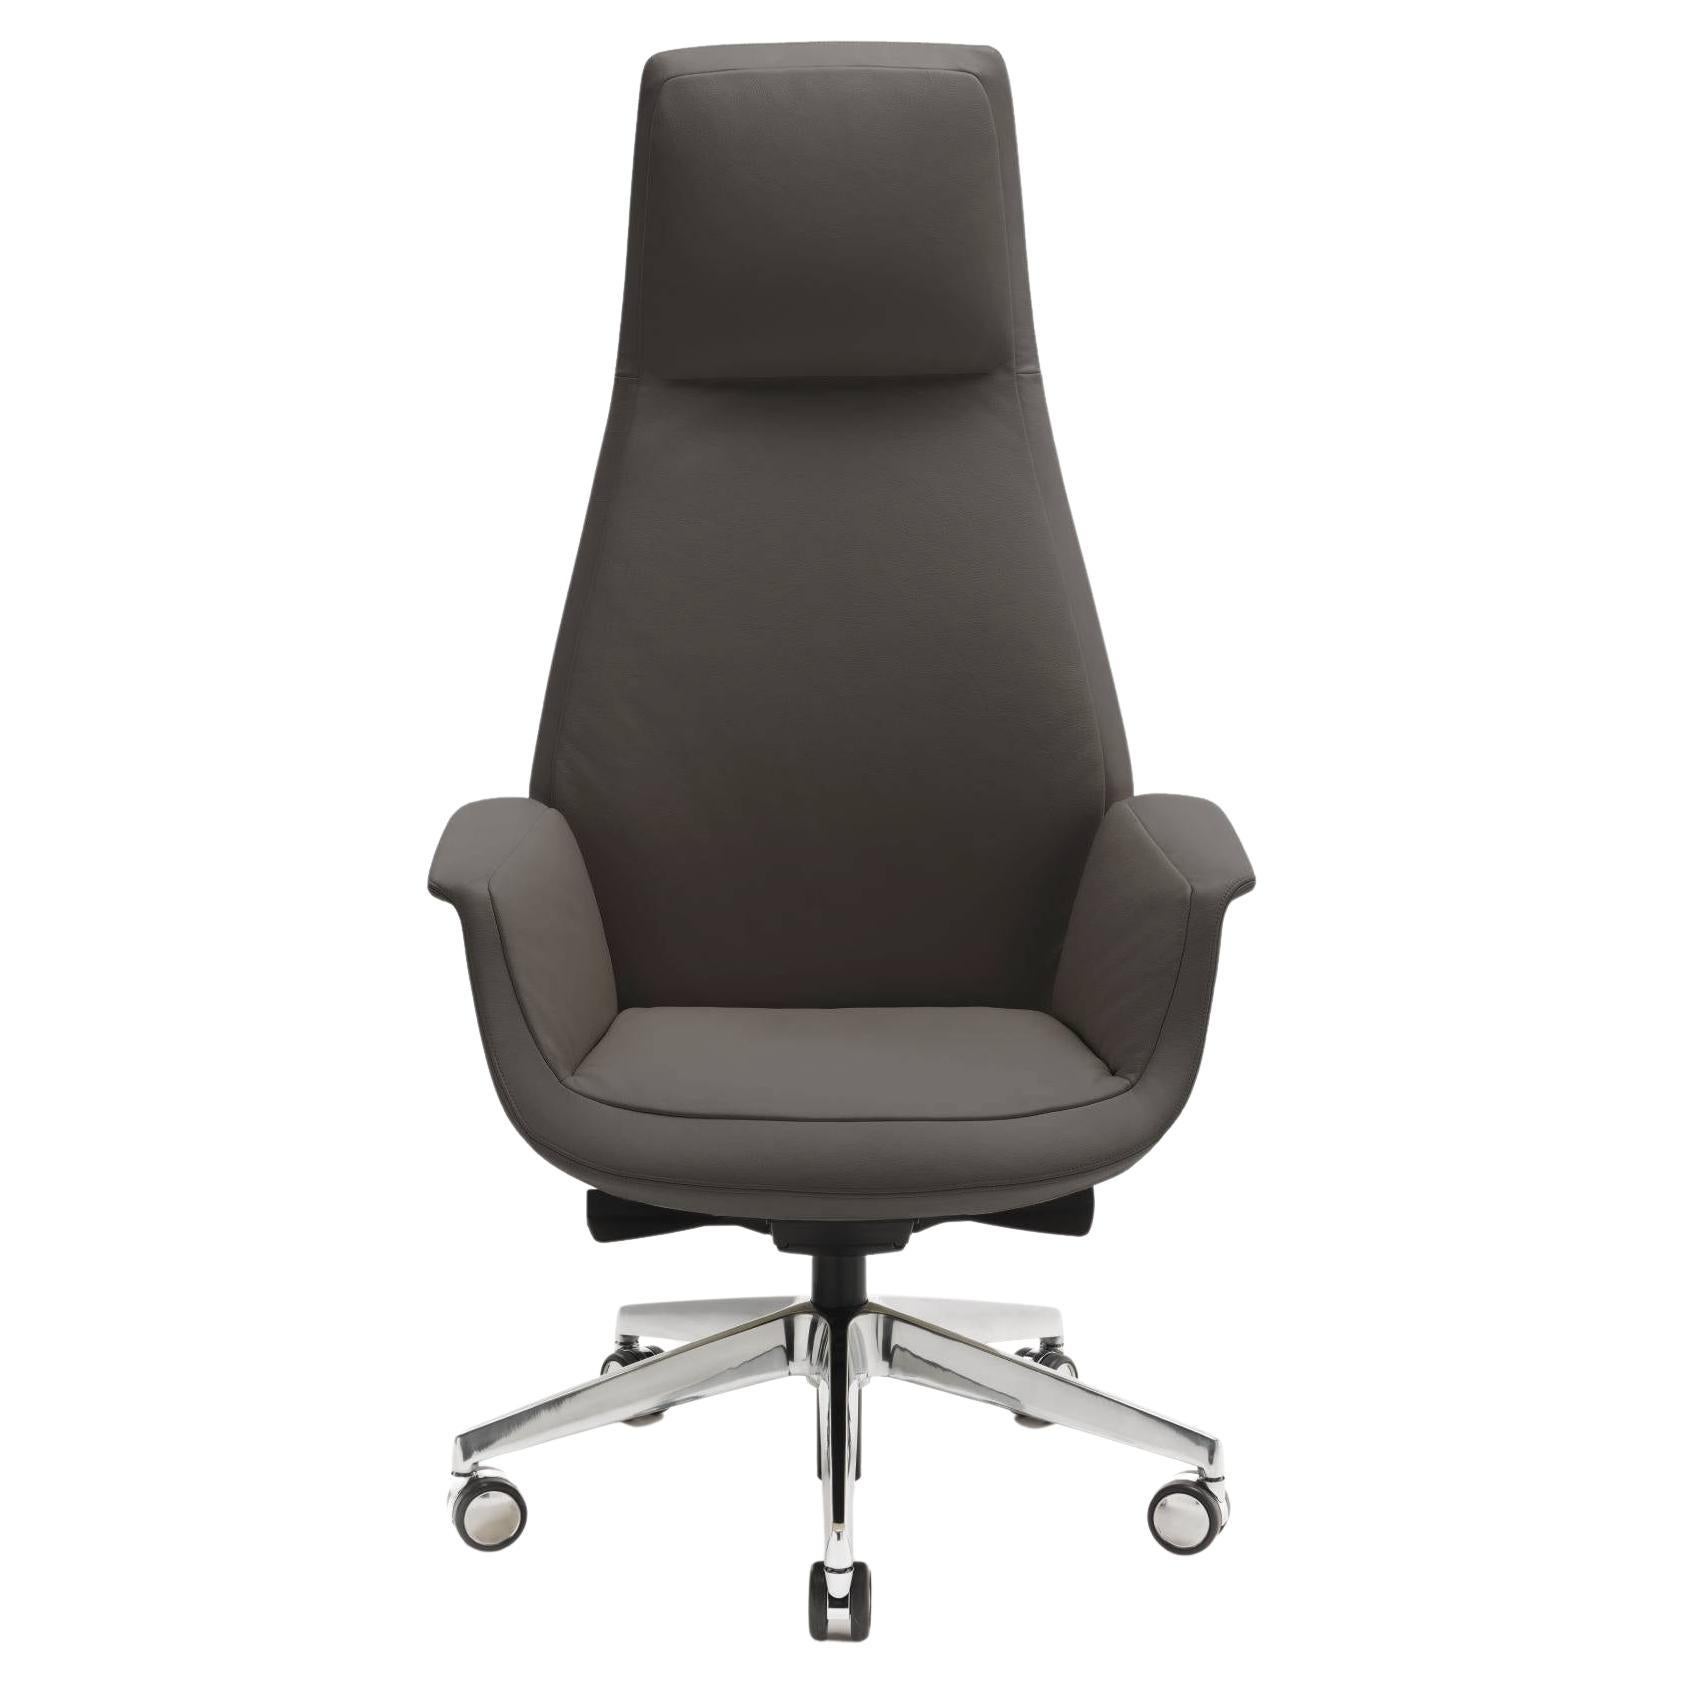 Downtown President Office Chair Genuine Leather Pelle SC 28 Seppia Dark Grey For Sale